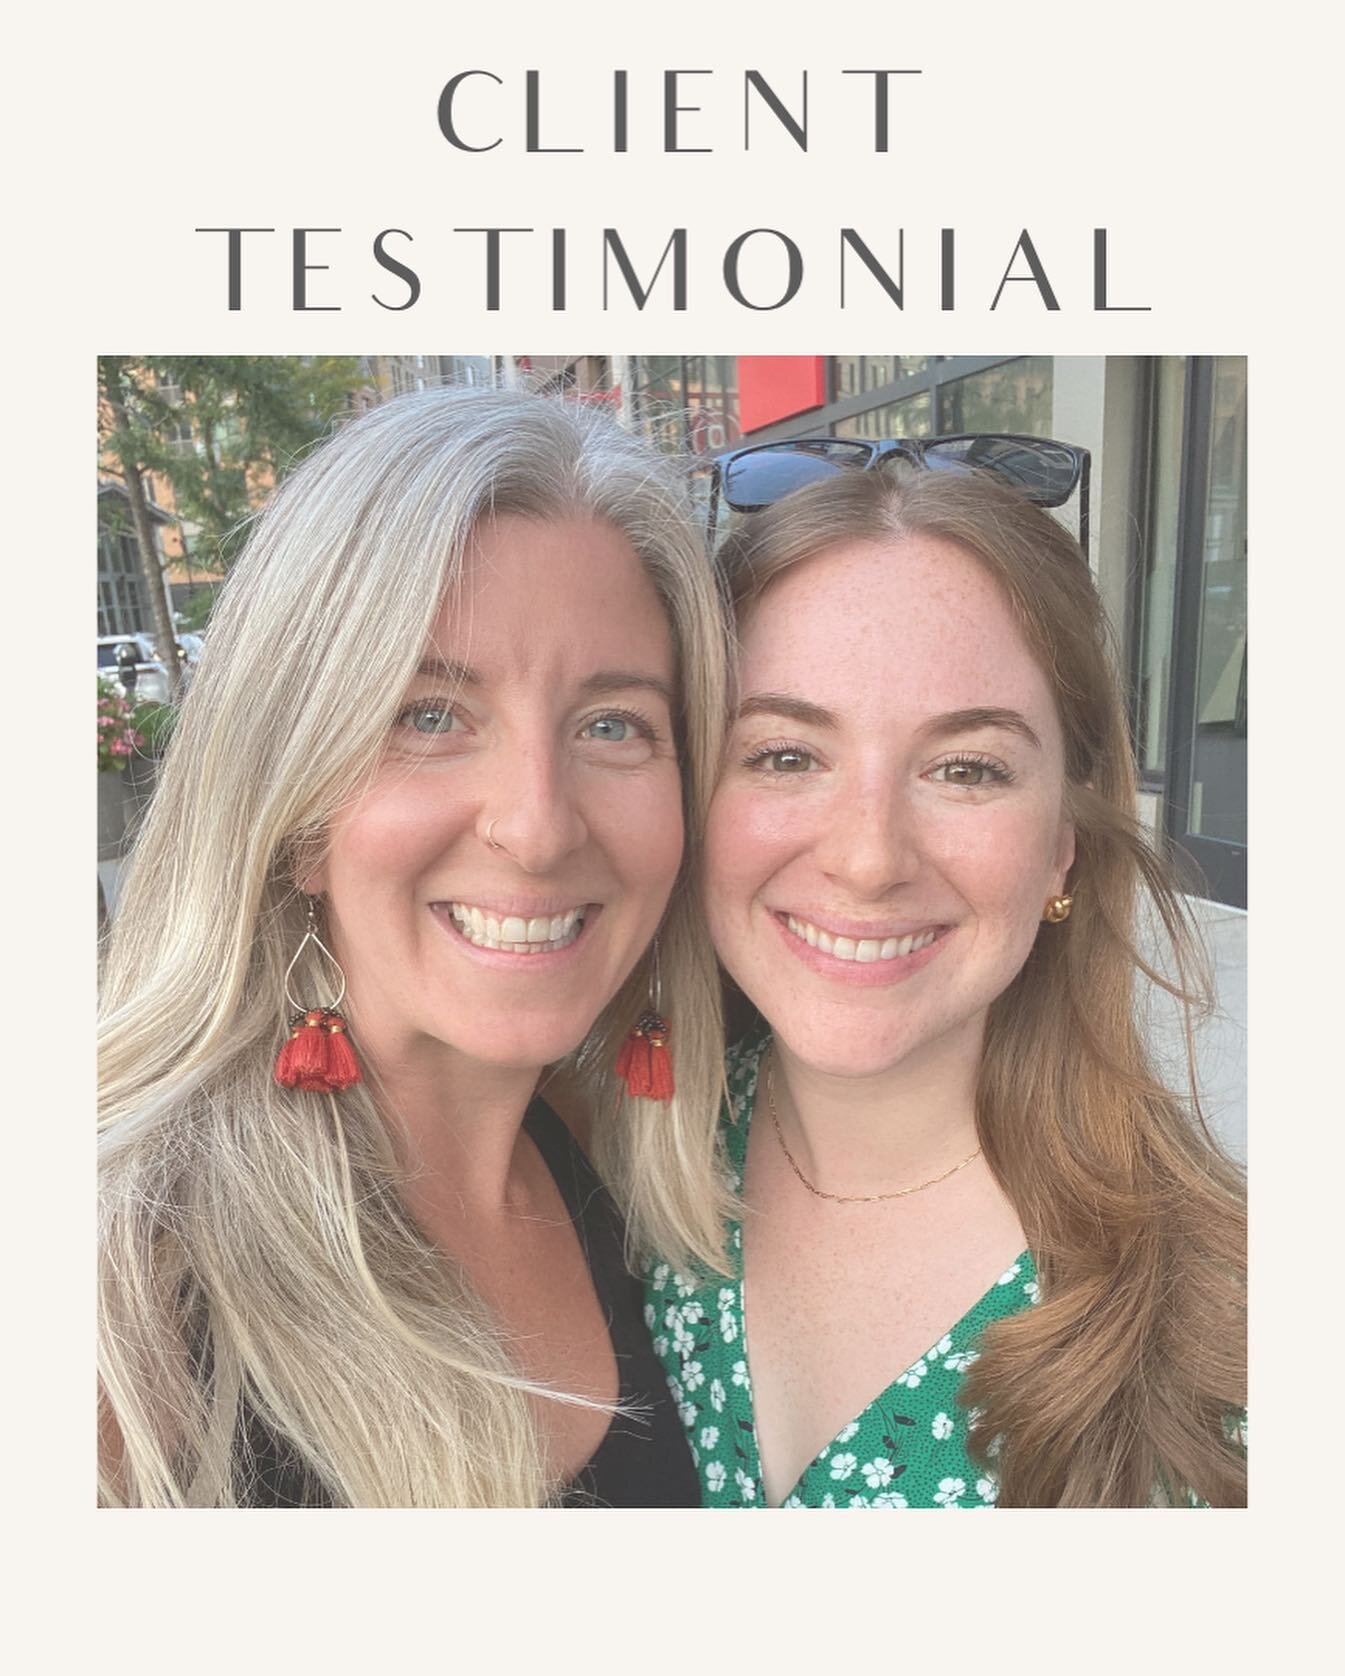 It&rsquo;s such an honor to do this work as a coach, to guide and support my clients. 

One of the things I love the most is the friendships that form with my clients. It&rsquo;s so special to have clients come back months and years beyond our coachi